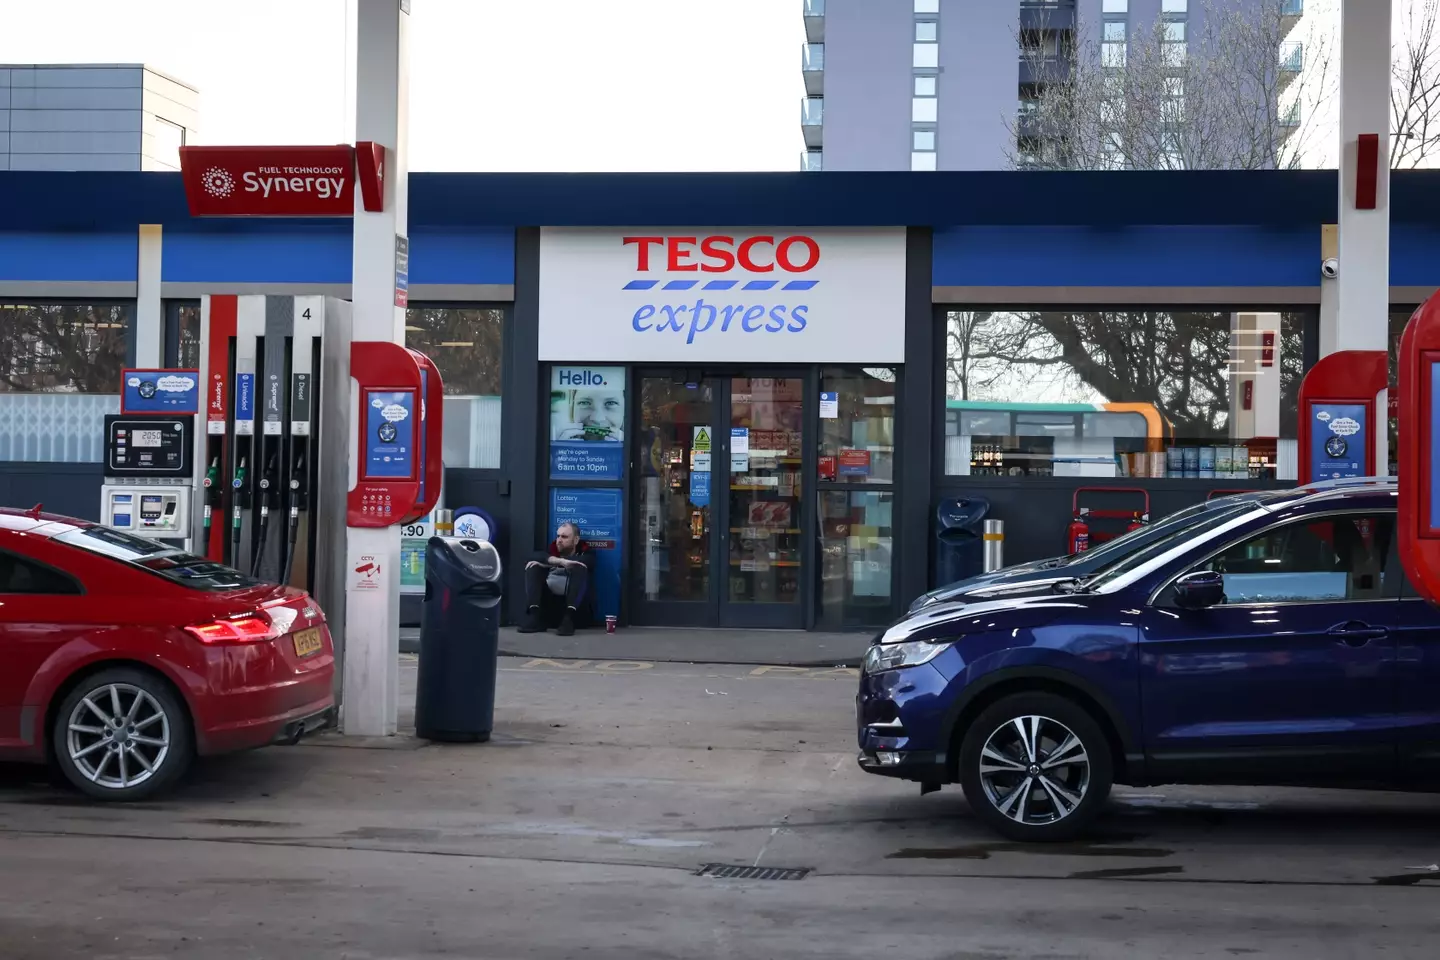 Some Tesco customers buying petrol have been shocked to discover they've been charged much more than they expected.